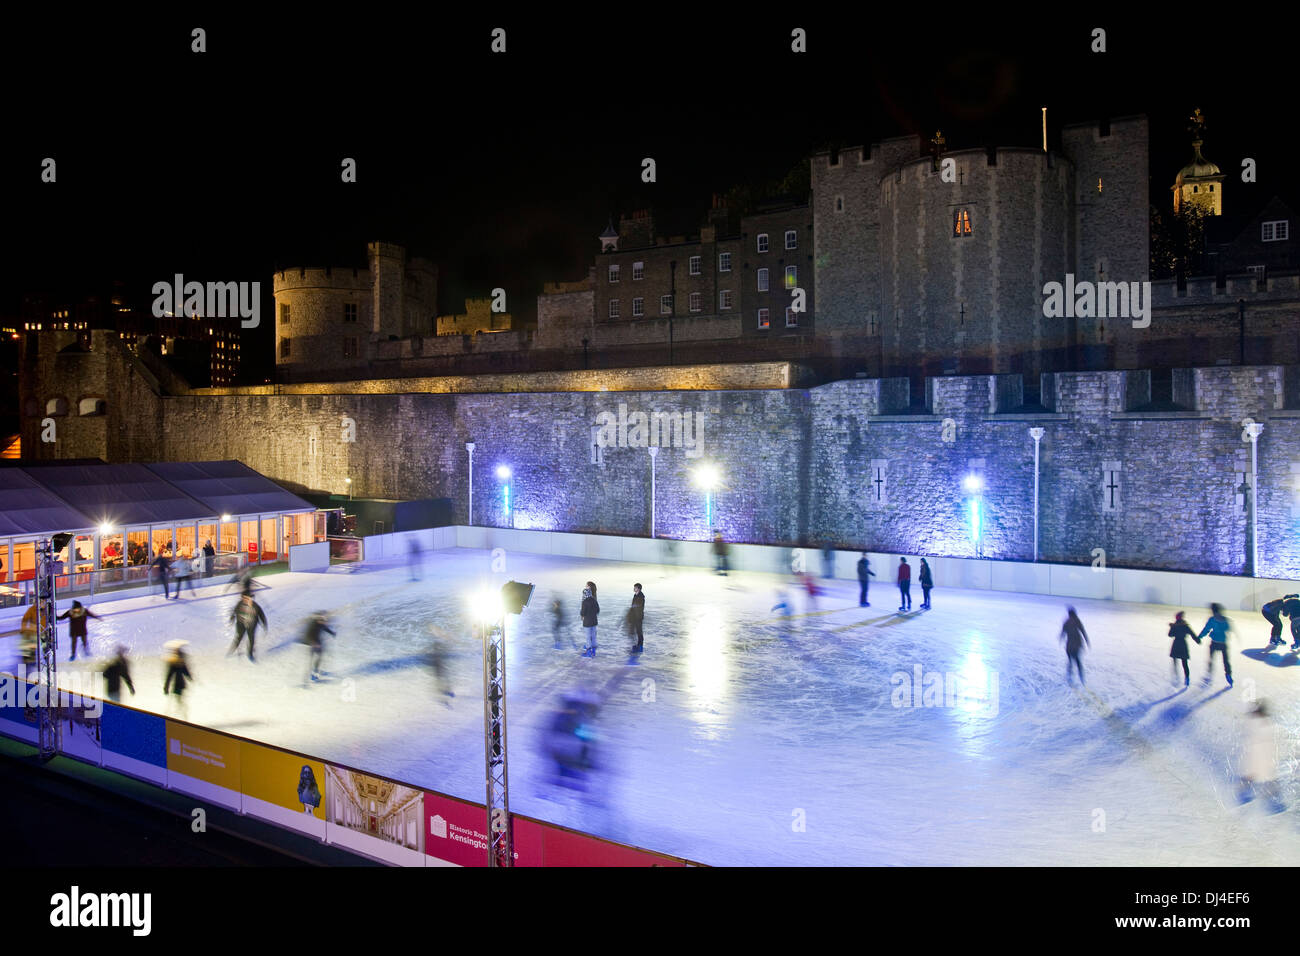 People Ice Skating, The Tower of London, London, England Stock Photo